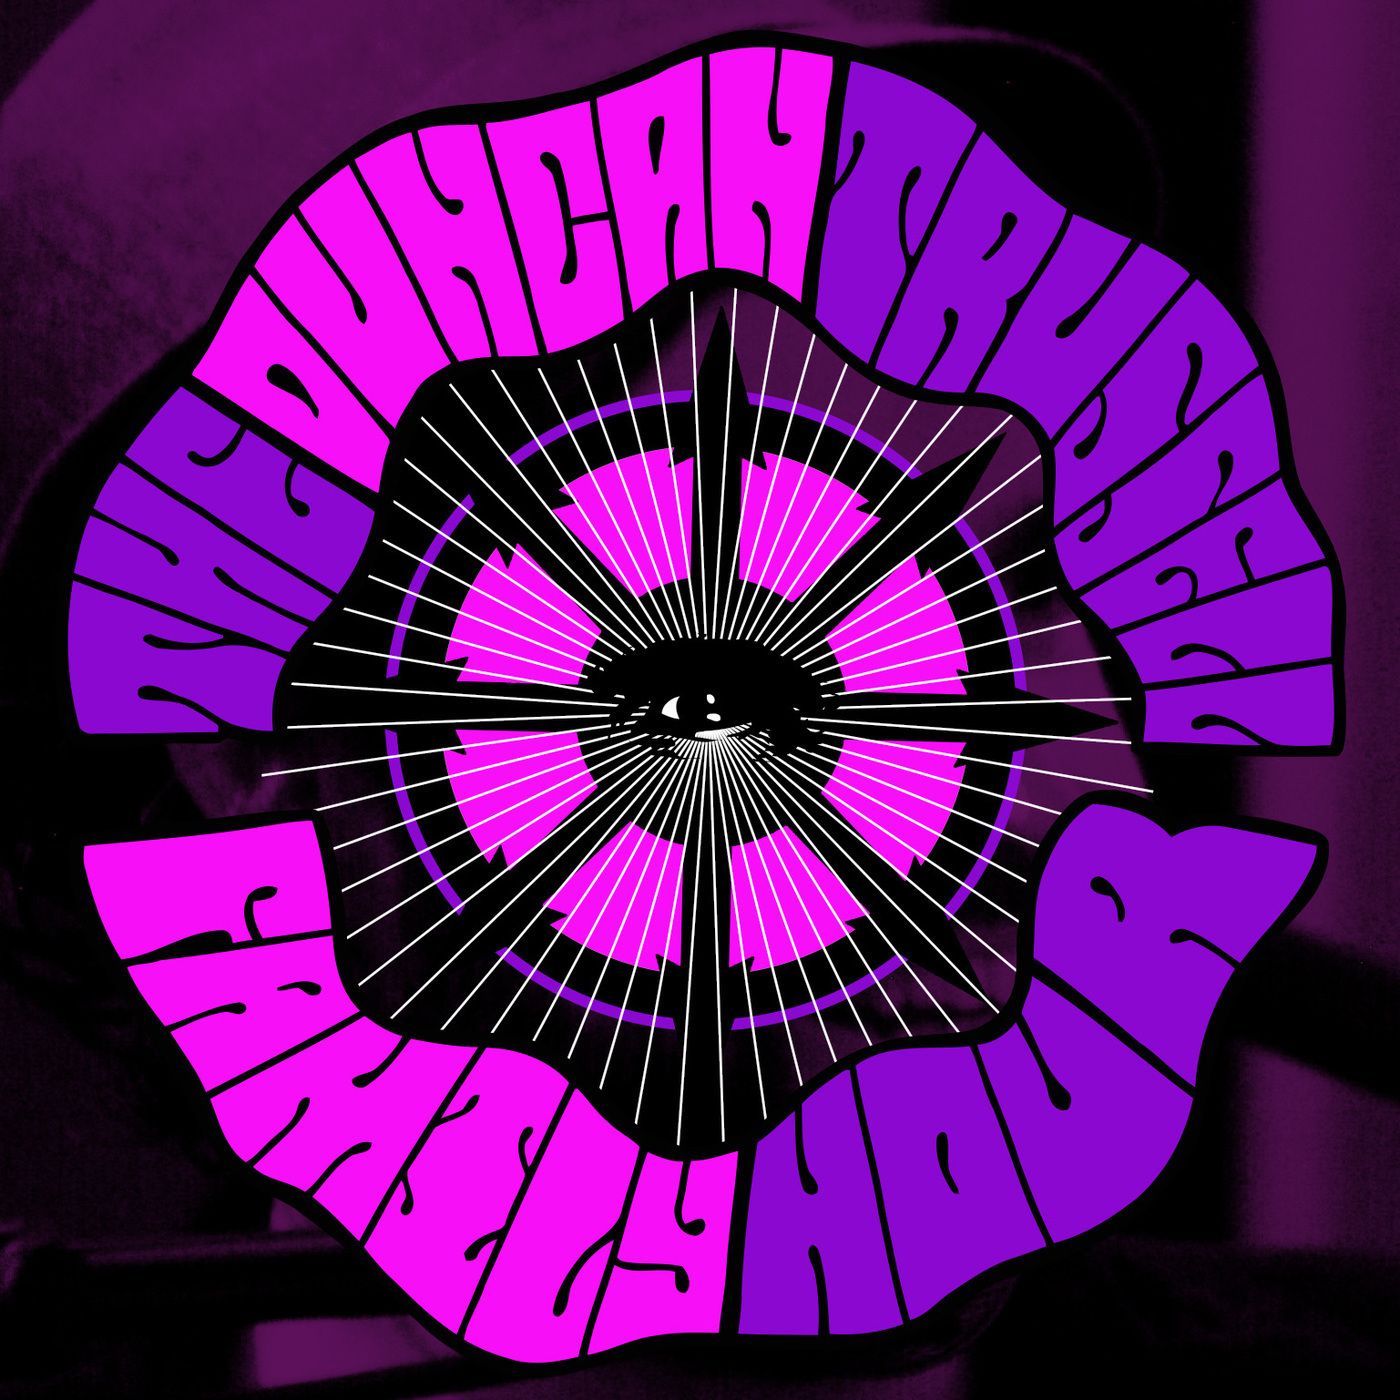 Duncan Trussell Processes Grief with His Dying Mom